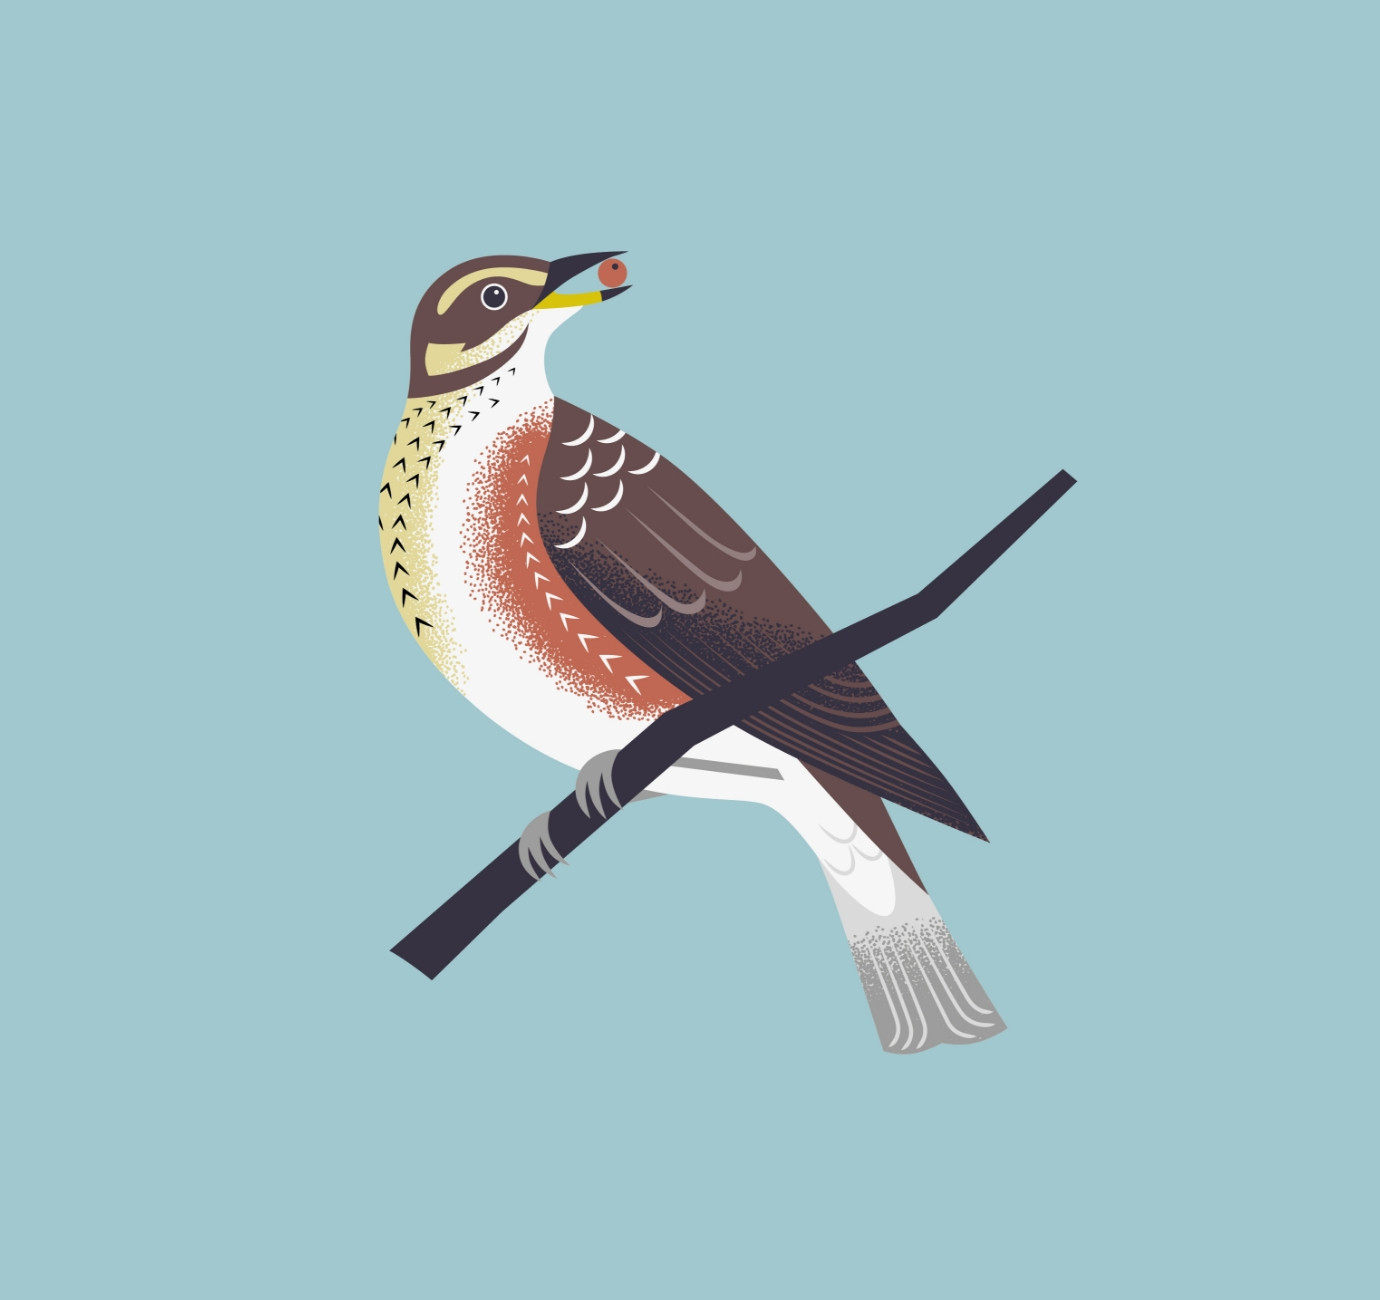 Lincs County Council bird spotting illustration by Root Studio